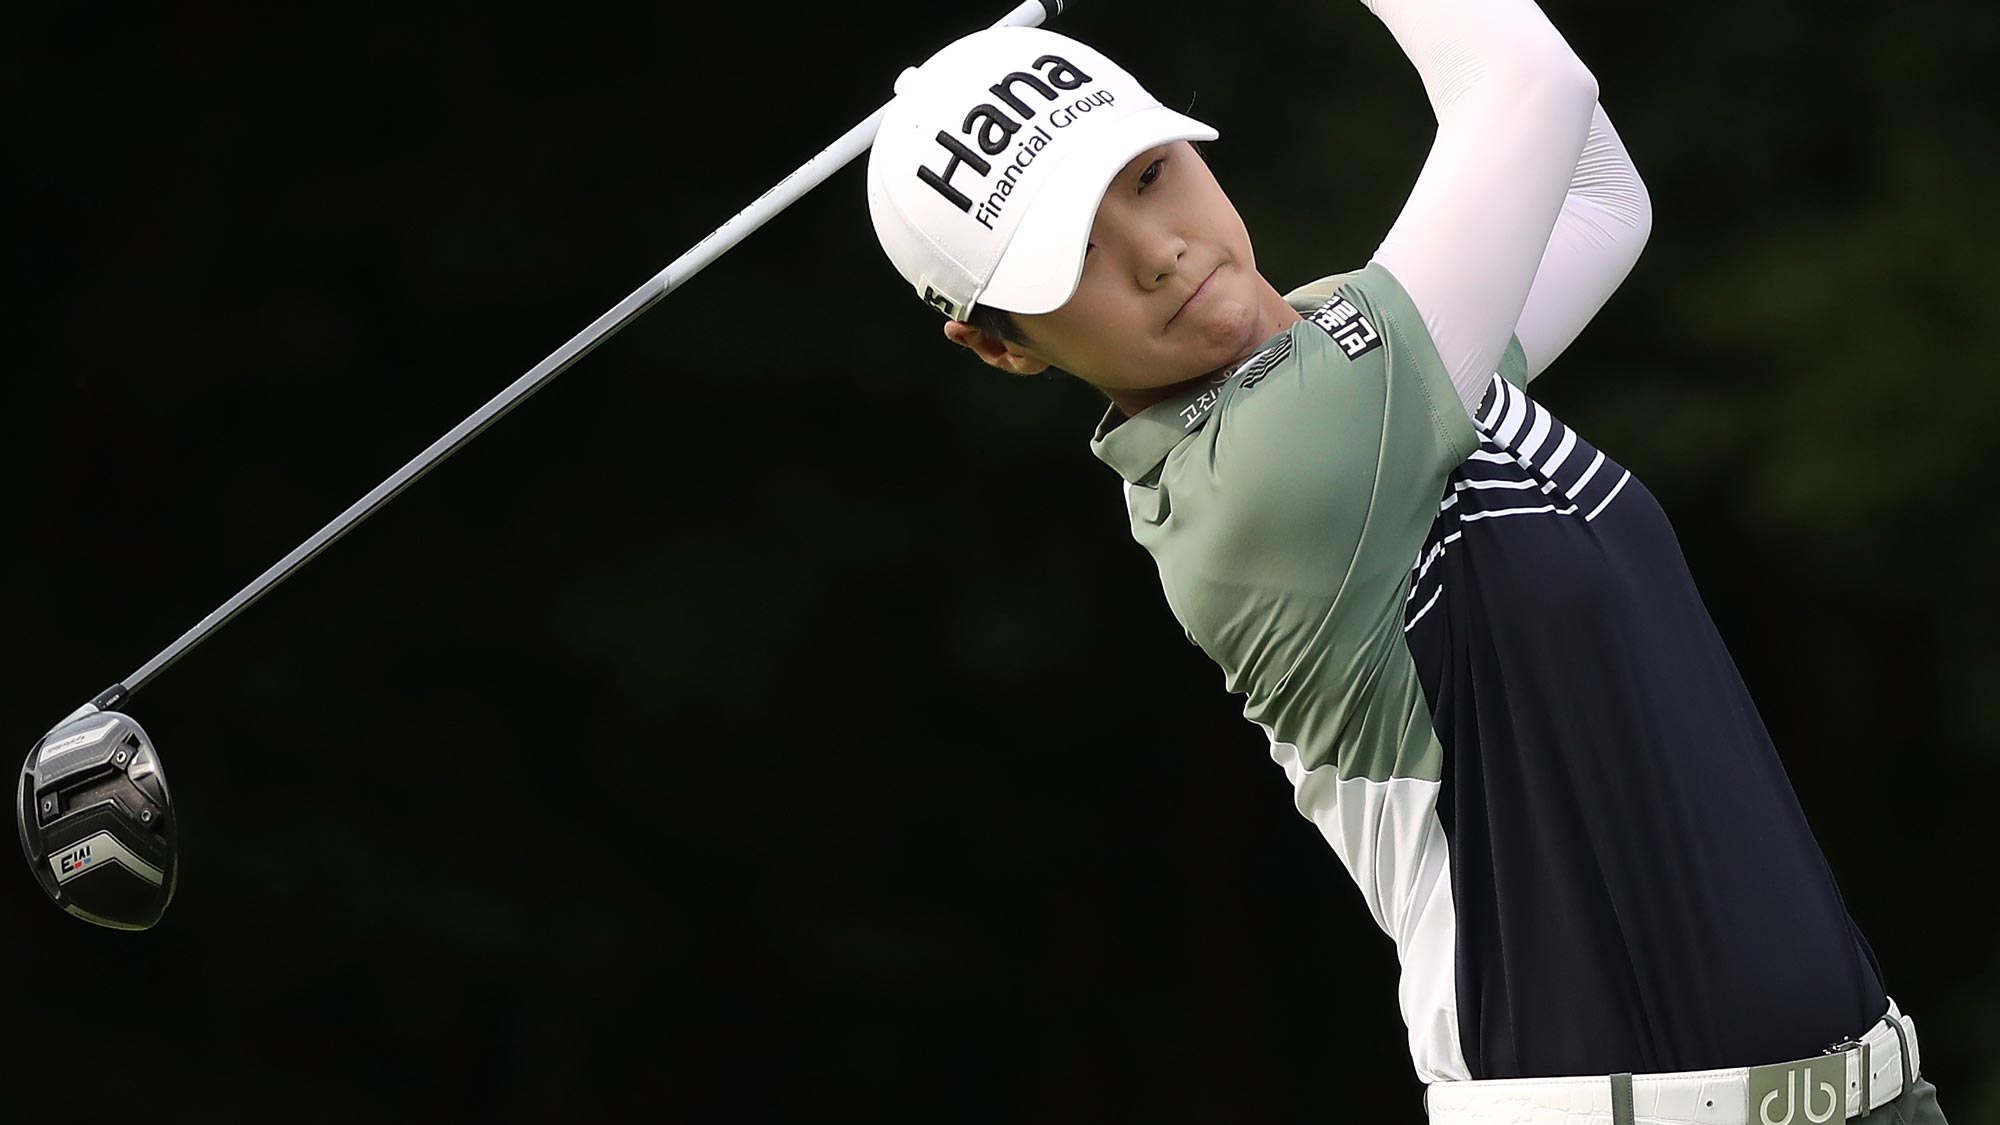 Sung Hyun Park of Korea watches her tee shot on the 15th hole during the first round of the 2018 KPMG Women's PGA Championship